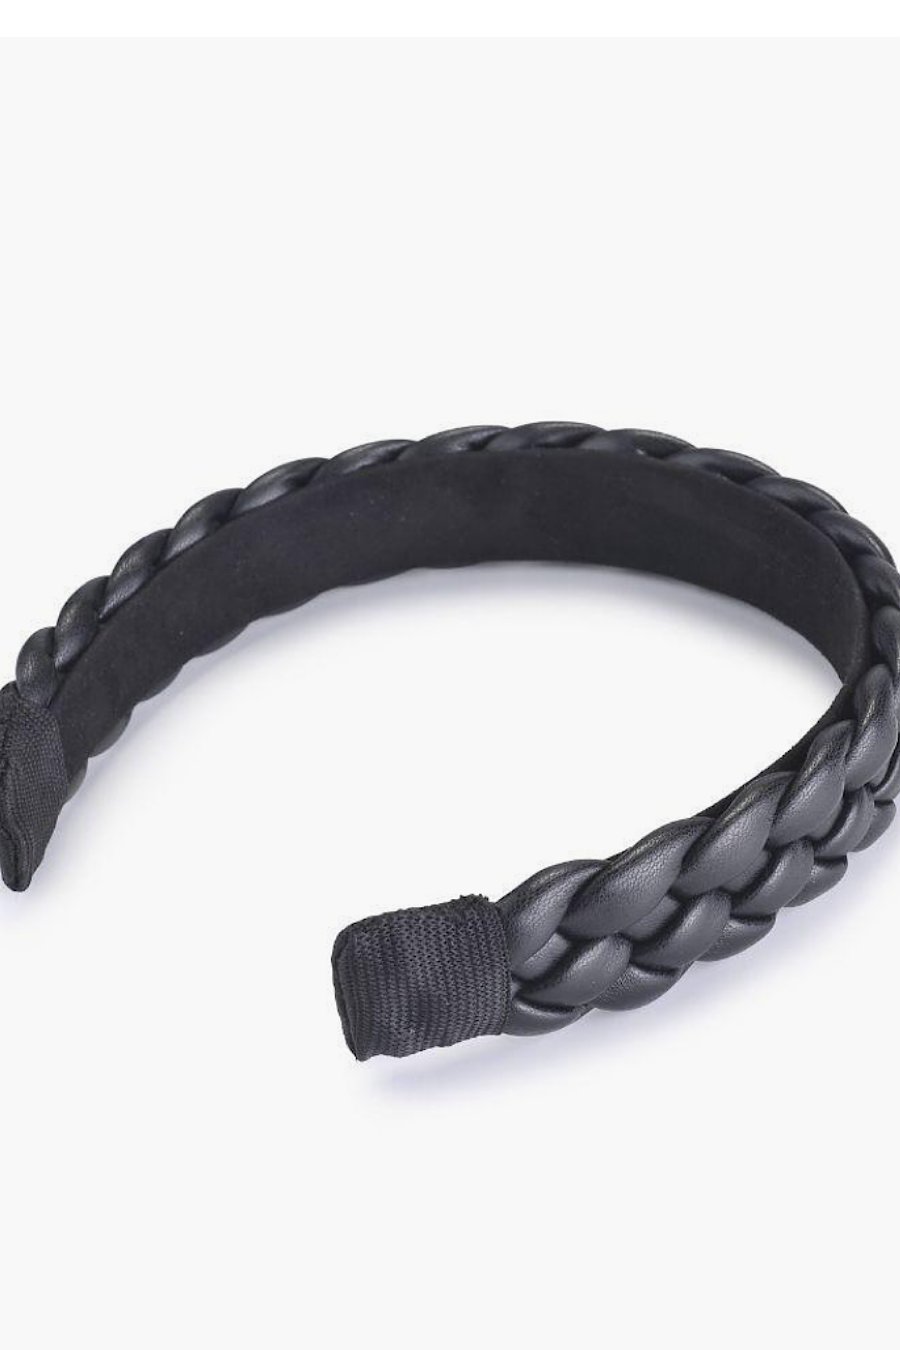 Braided Leather Headband in Cocoa or Black